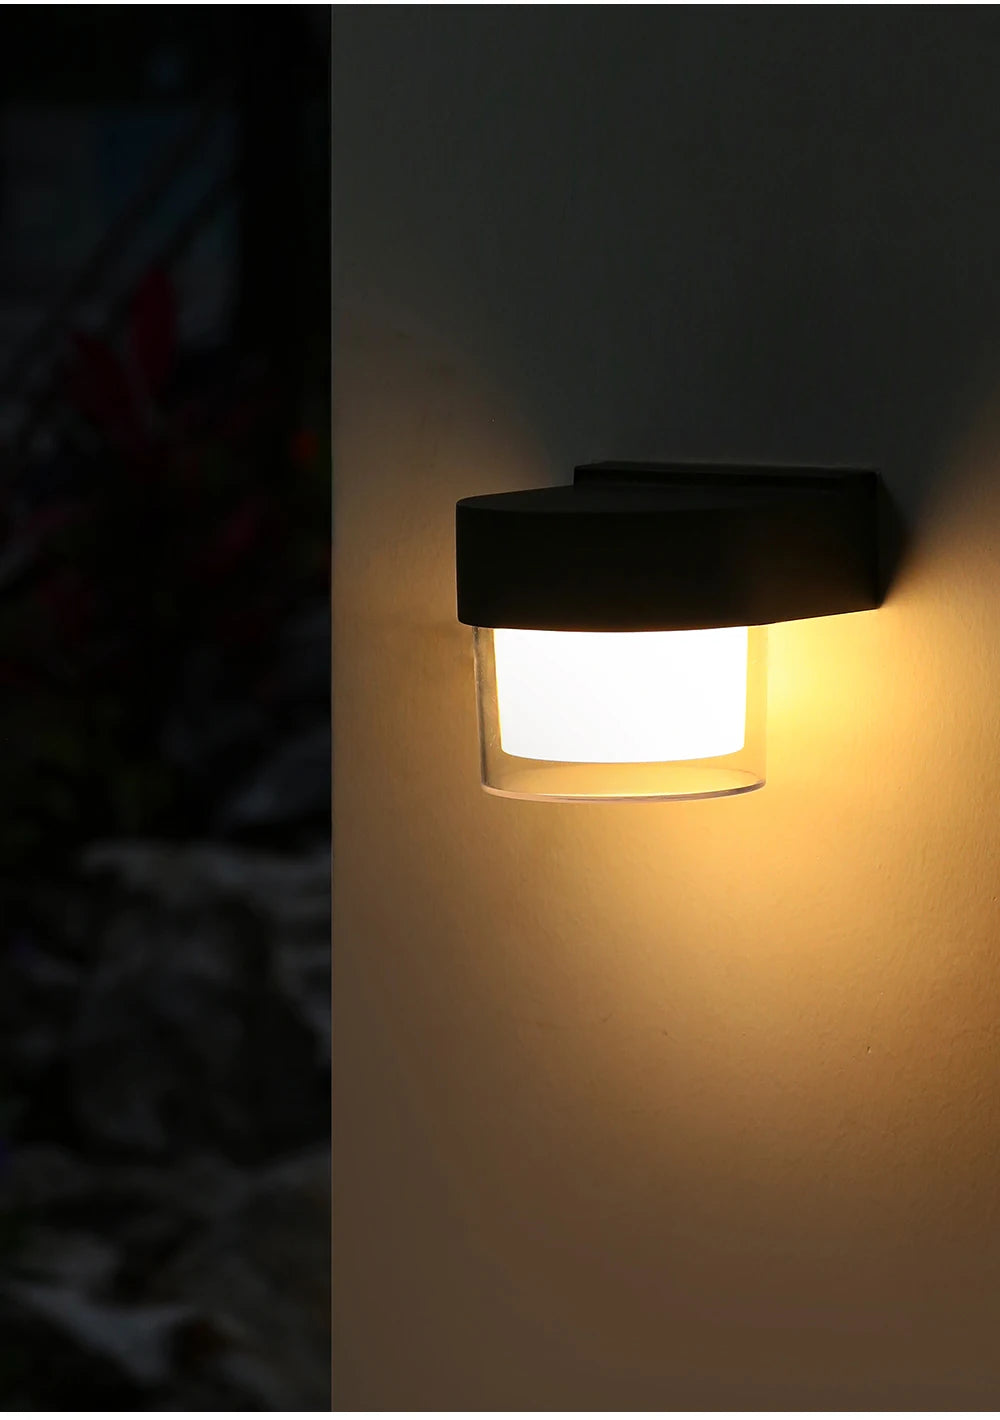 IP65 Waterproof Interior Wall Light, Contact seller before filing dispute; we'll try to resolve issue satisfactorily.